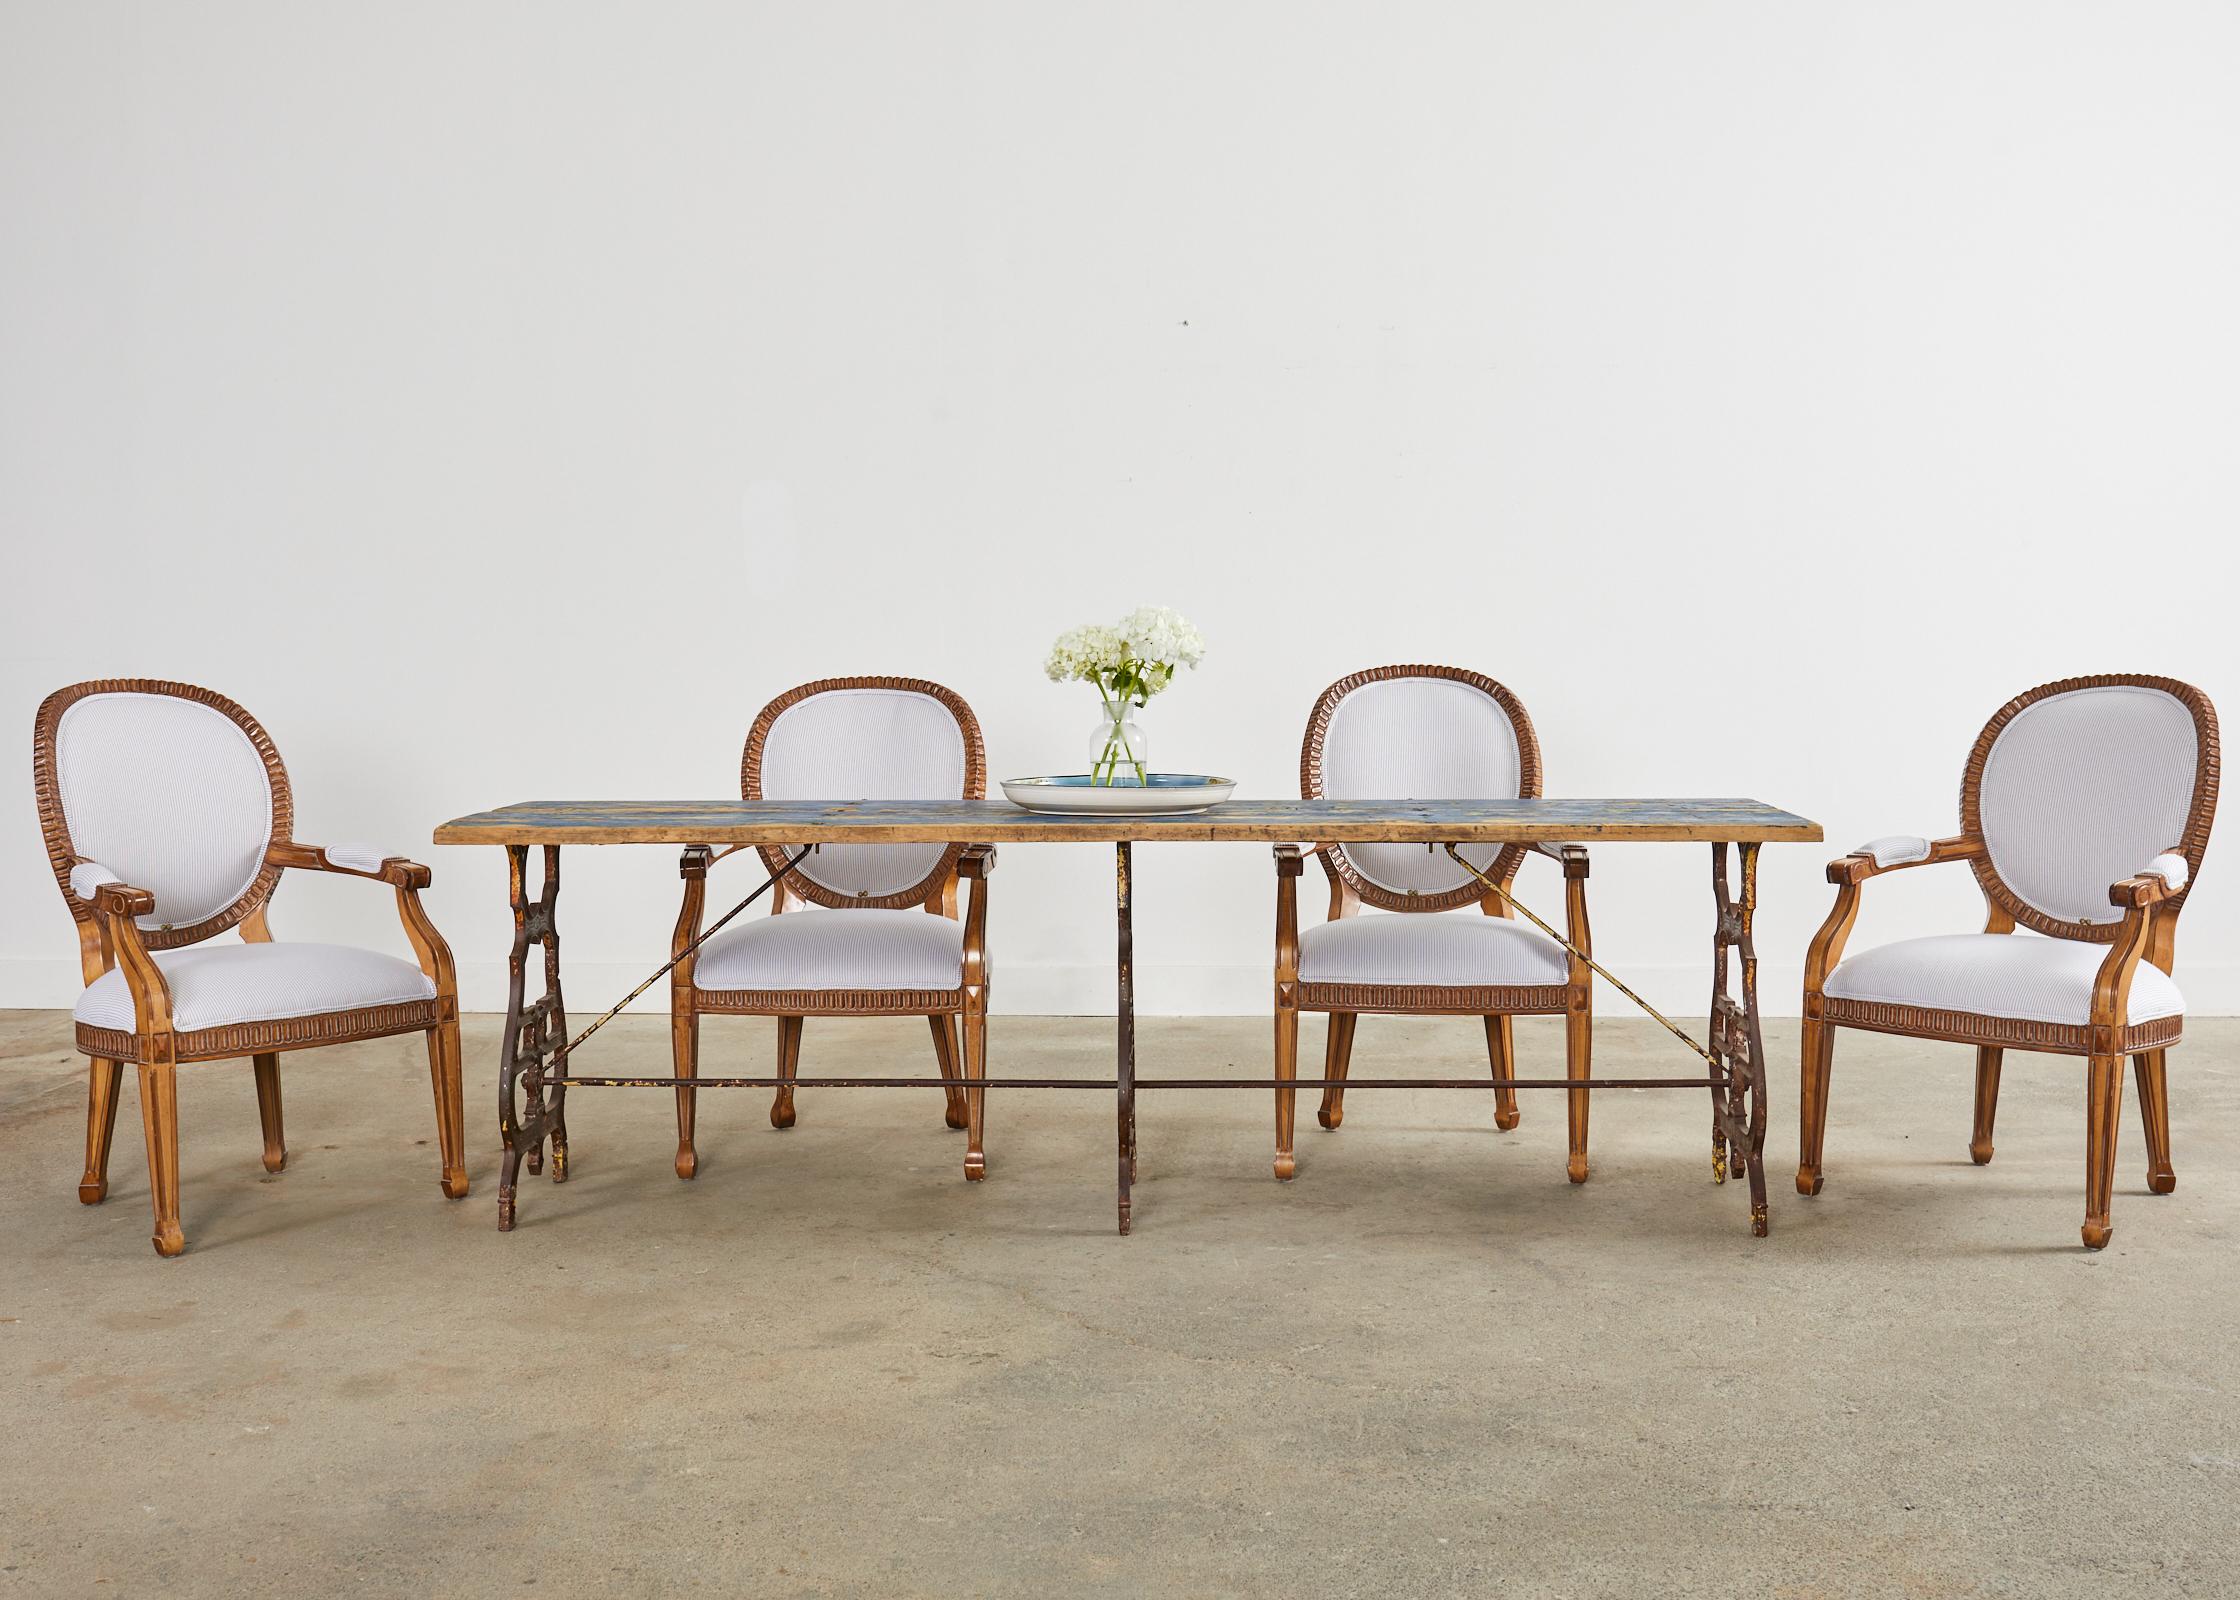 Gorgeous set of six hand-carved dining armchairs by Kreiss Interior Design Los Angeles, CA. The Peninsula armchair is crafted by California artisans in the French Louis XVI inspiration with a dramatic large round back. The generous frames are